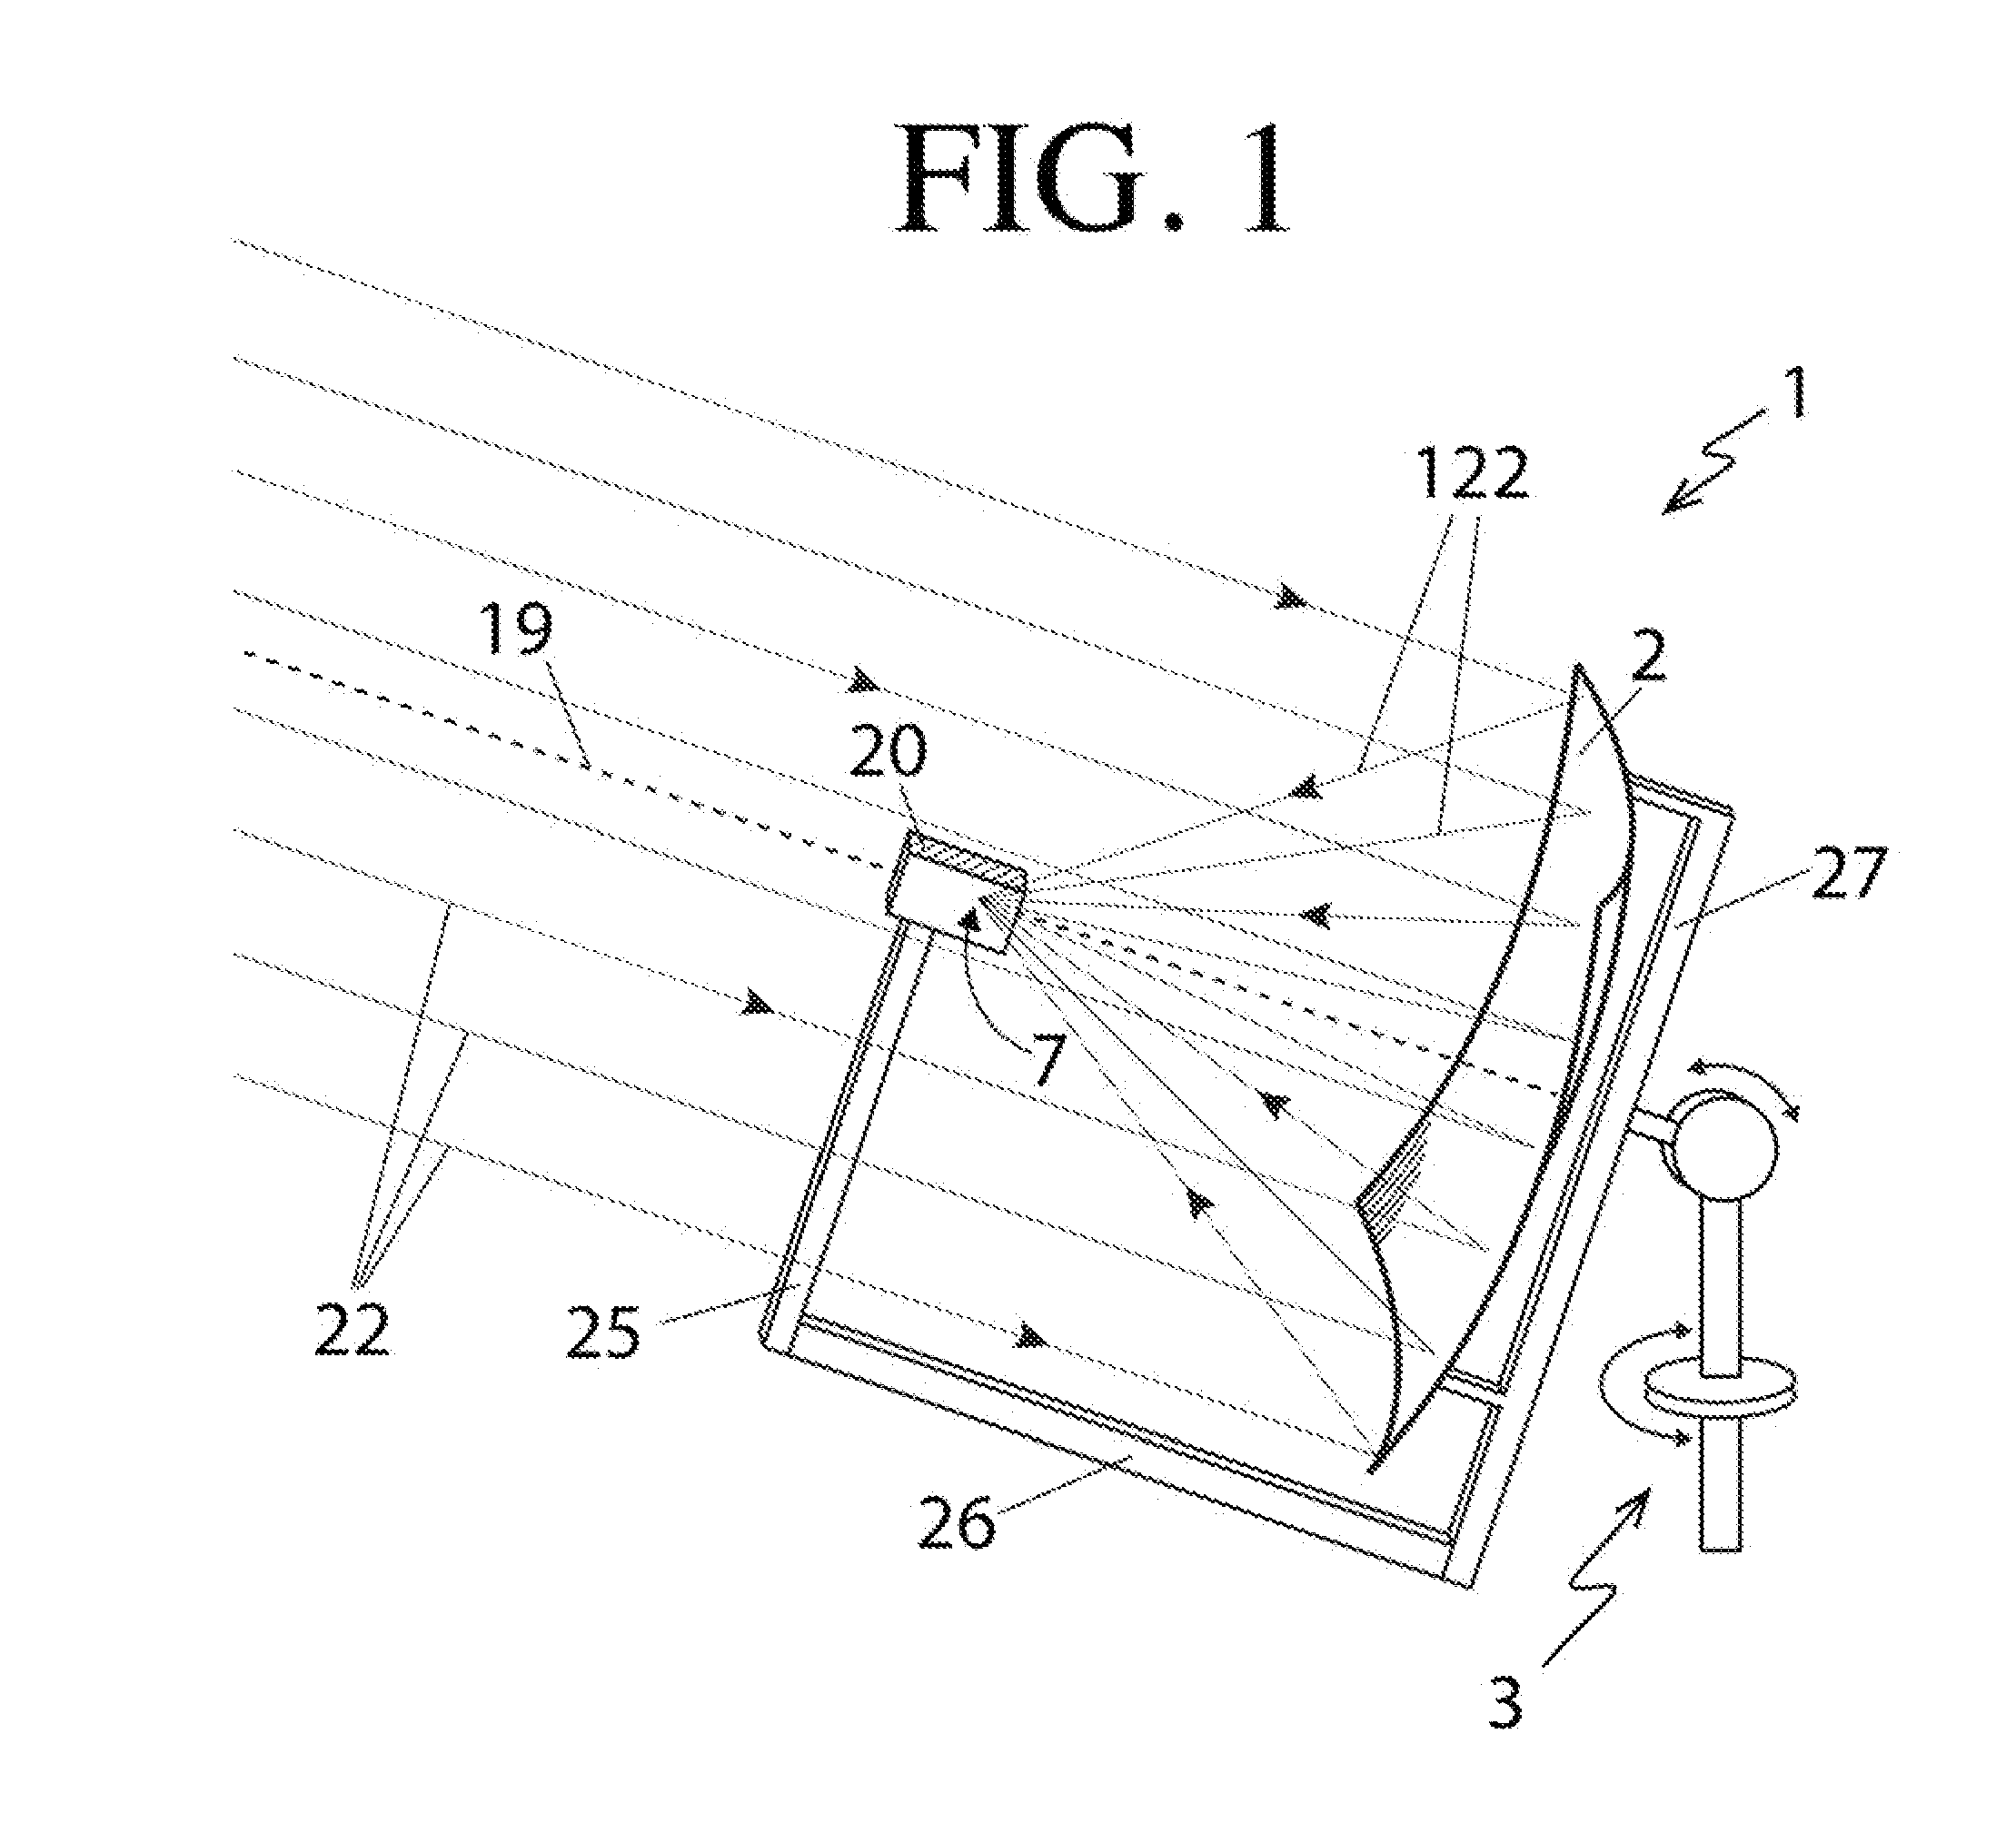 Solar generator with large reflector dishes and concentrator photovoltaic cells in flat arrays